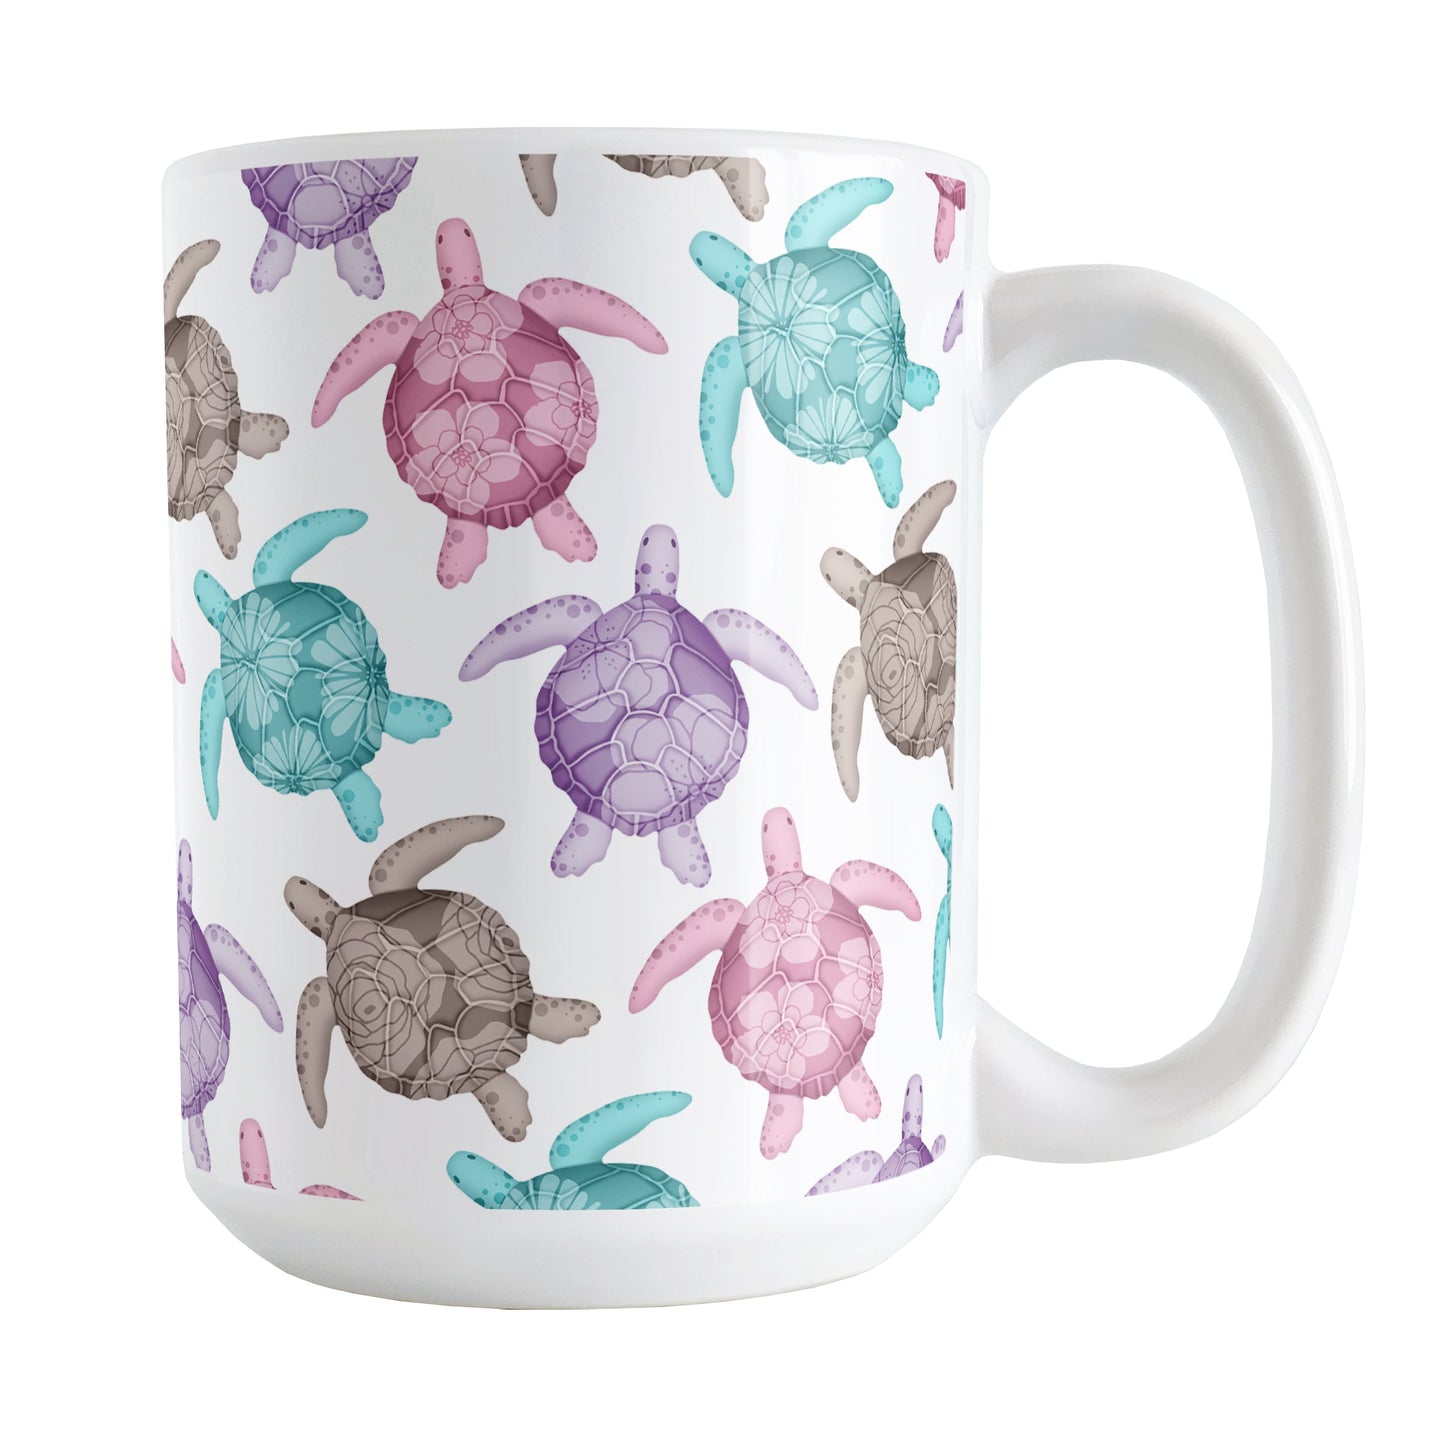 Cute Sea Turtles Pattern Mug (15oz) at Amy's Coffee Mugs. A ceramic mug with a pattern of sea turtles in a cute color palette of pink, purple, teal and brown that wraps around the mug to the handle. Each cool colored sea turtle has a different floral watermark over its shell.